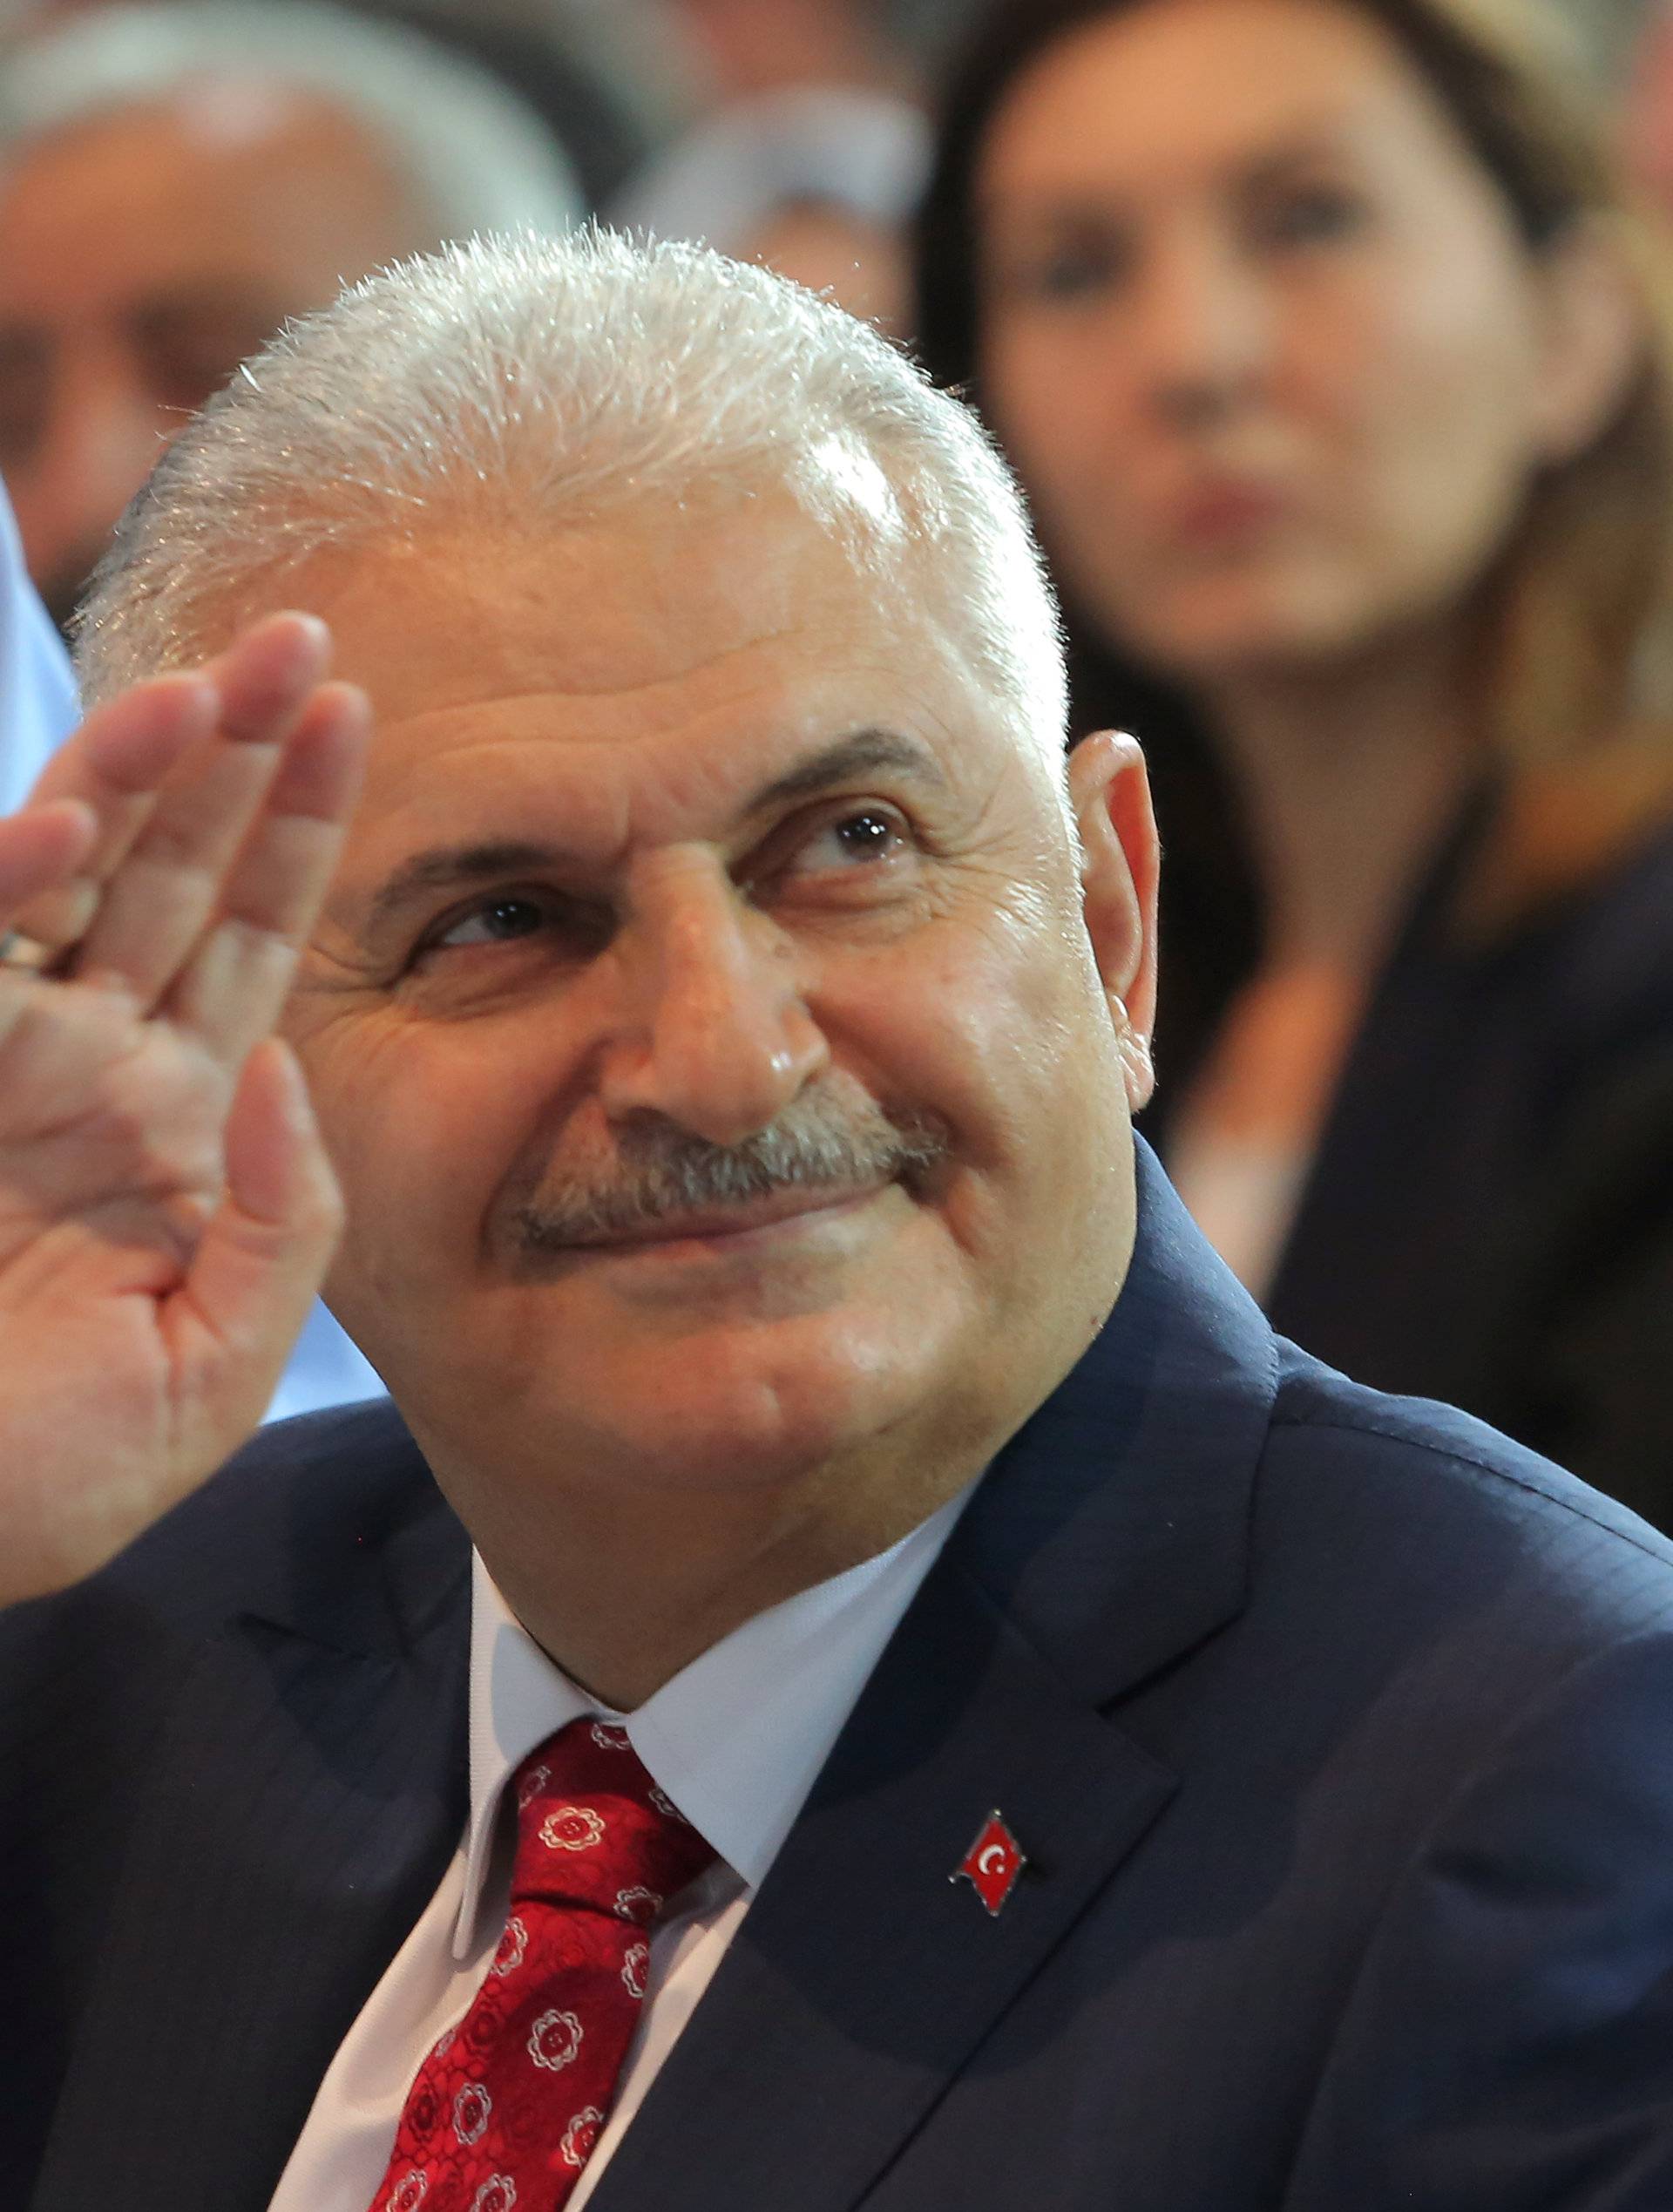 Turkey's Transportation Minister Yildirim greets members of his party during the AKP extraordinary congress in Ankara